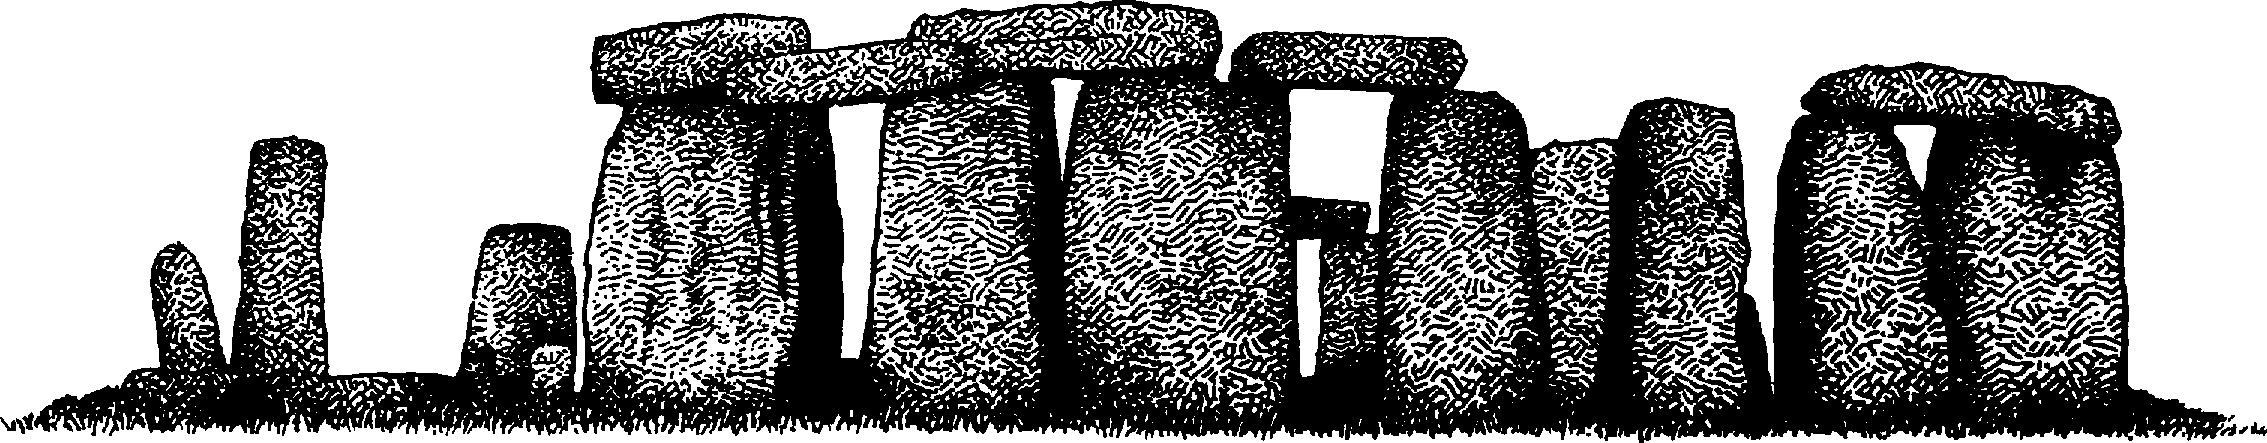 Stonehenge clipart #17, Download drawings